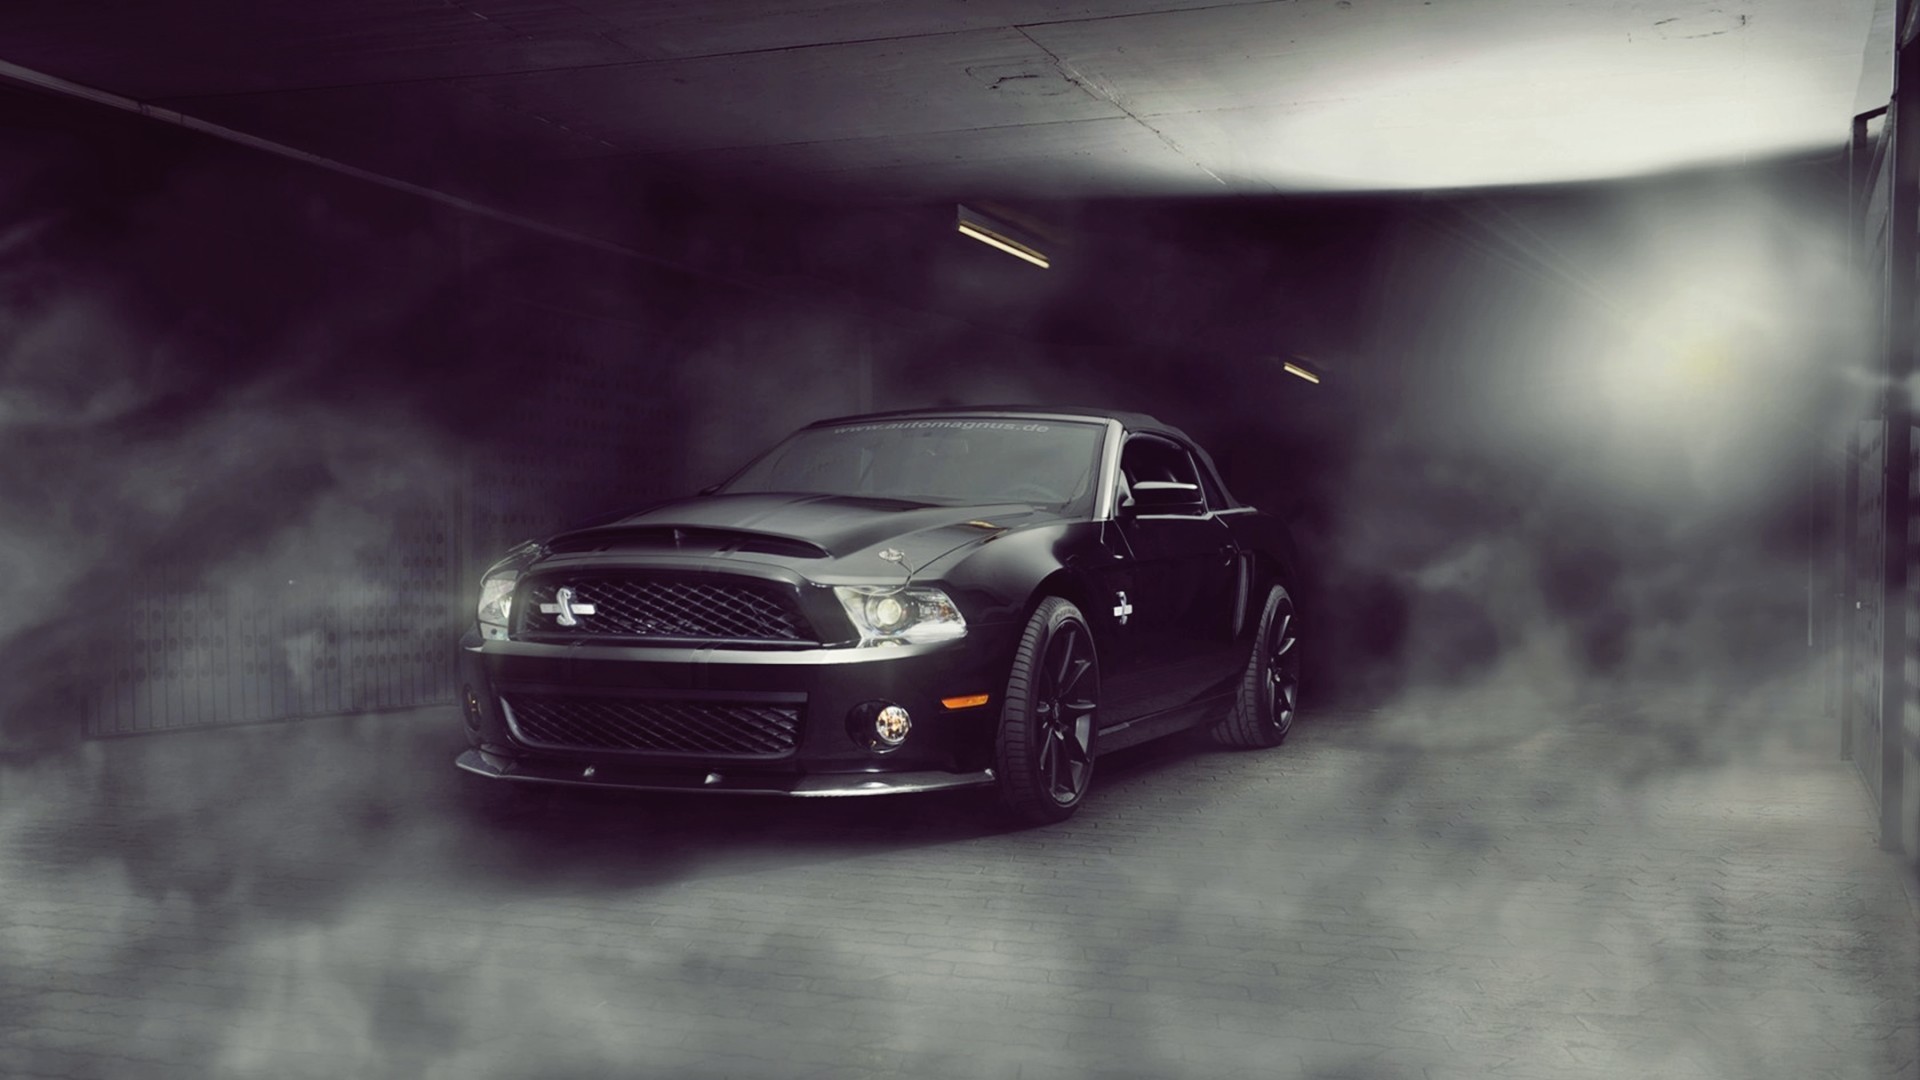 1920x1080 Black Cars Ford Mustang Knight Rider Lights Muscle Car Shelby GT500  SuperSnake Smoke